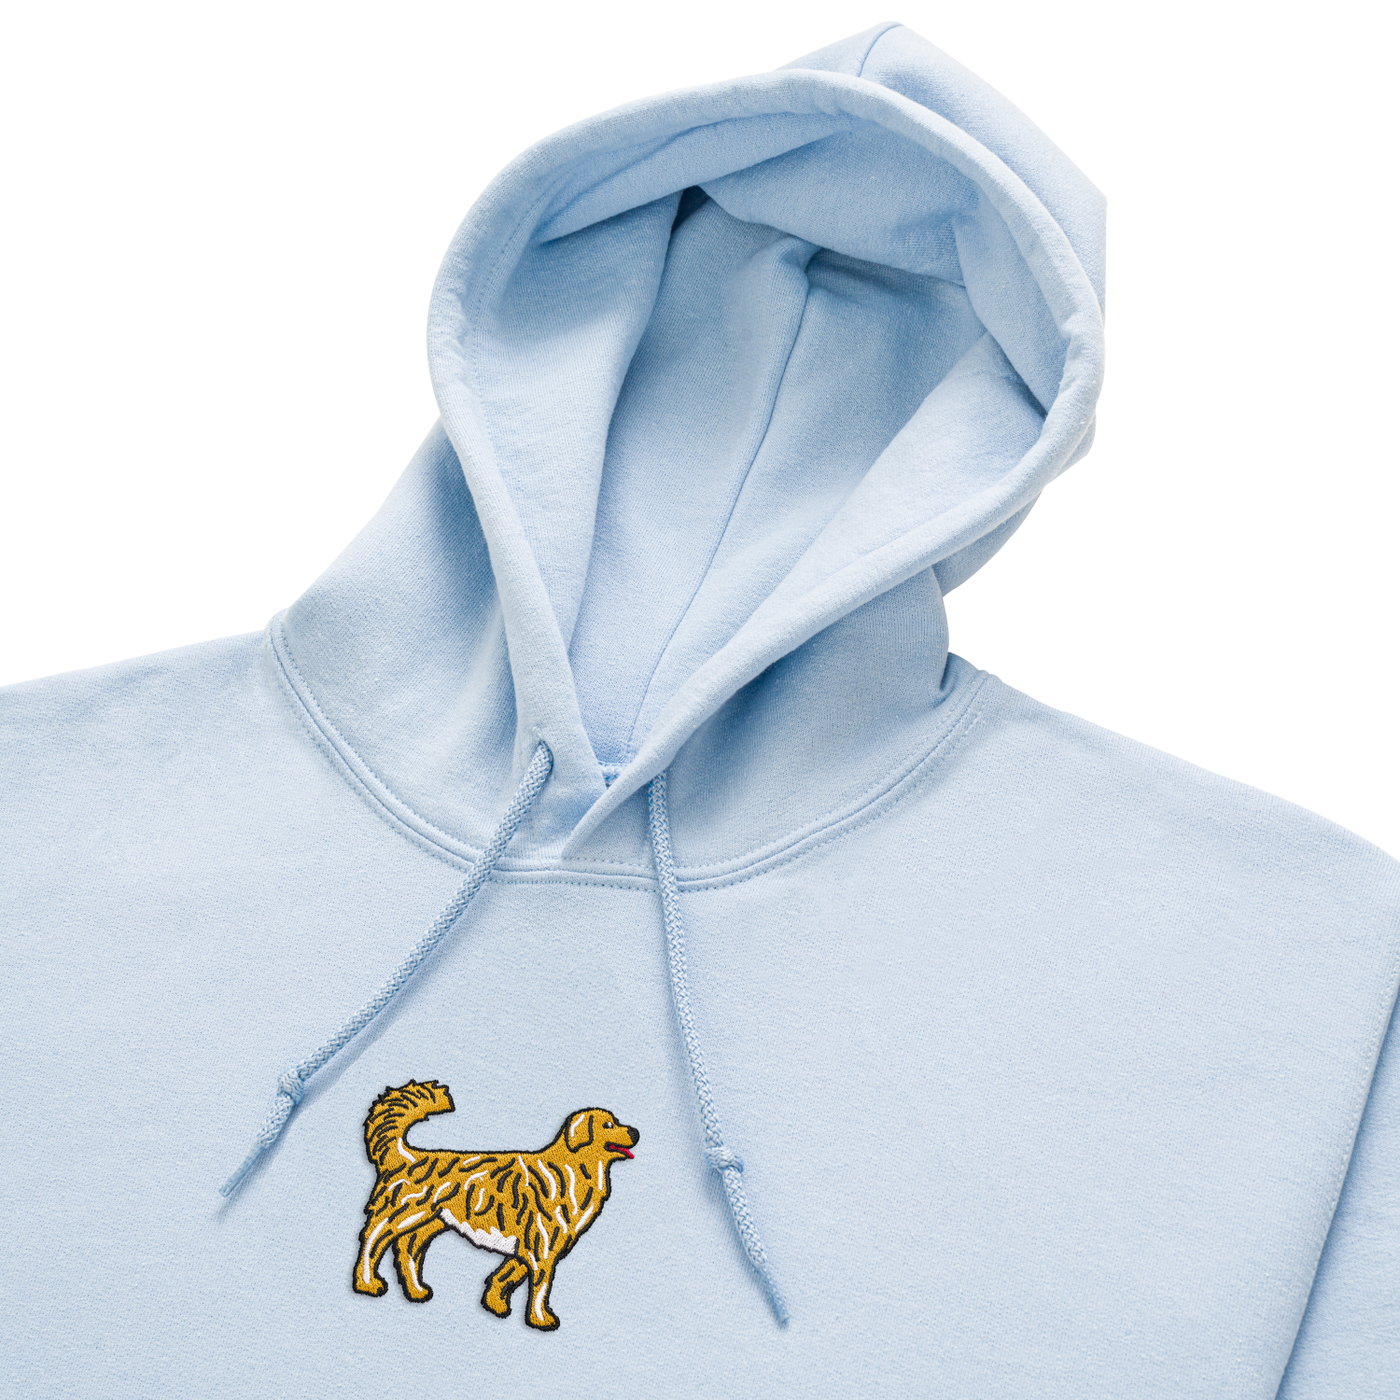 Bobby's Planet Women's Embroidered Golden Retriever Hoodie from Paws Dog Cat Animals Collection in Light Blue Color#color_light-blue